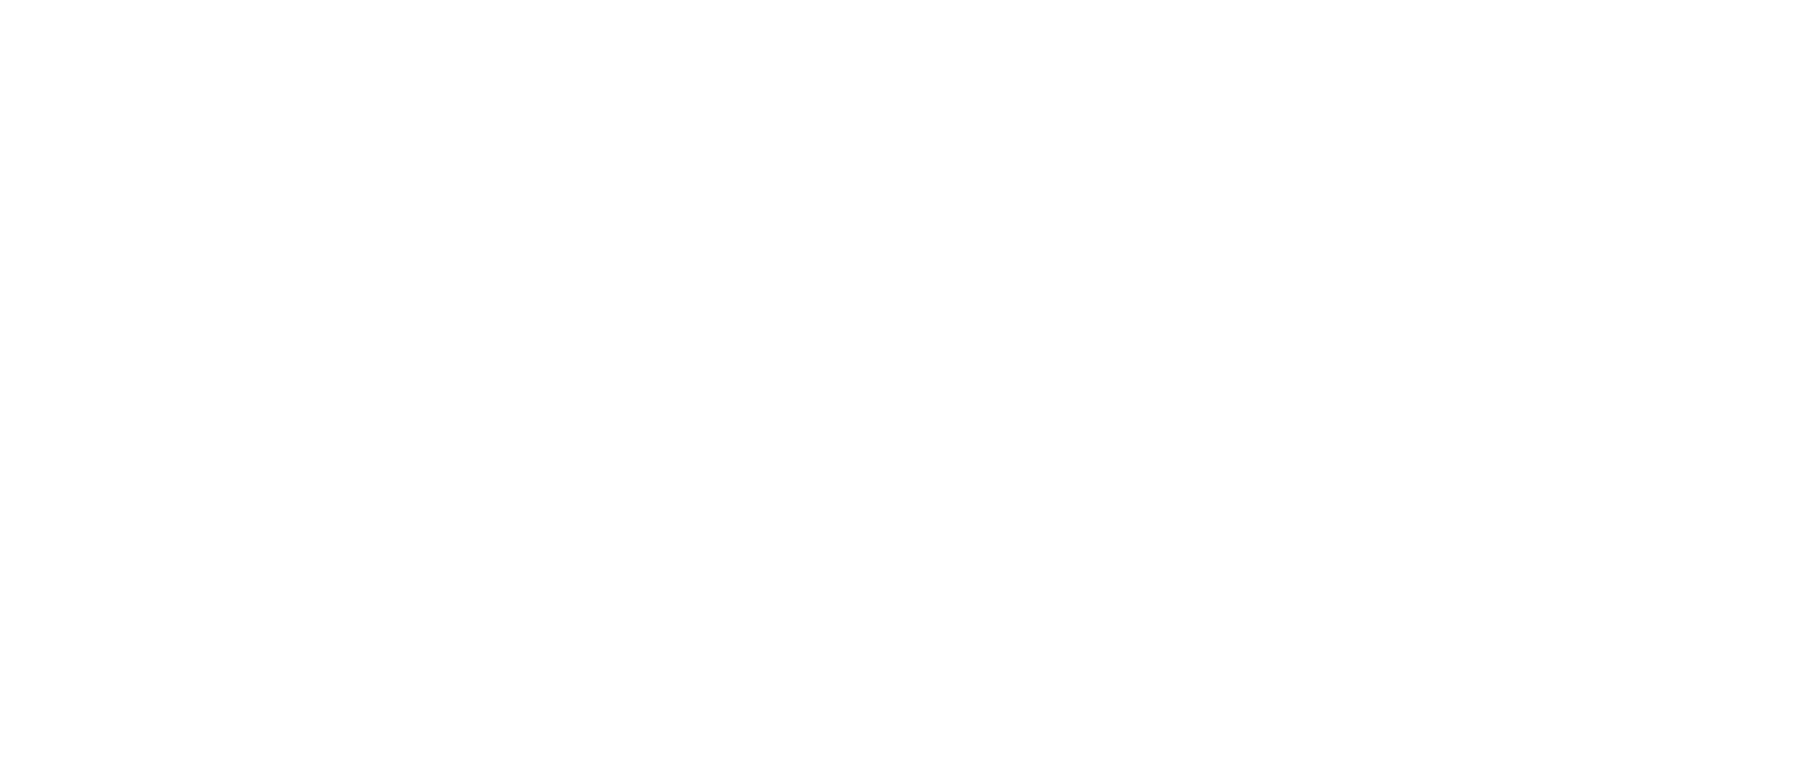 Ayres Suites Mission Viejo - Lake Forest